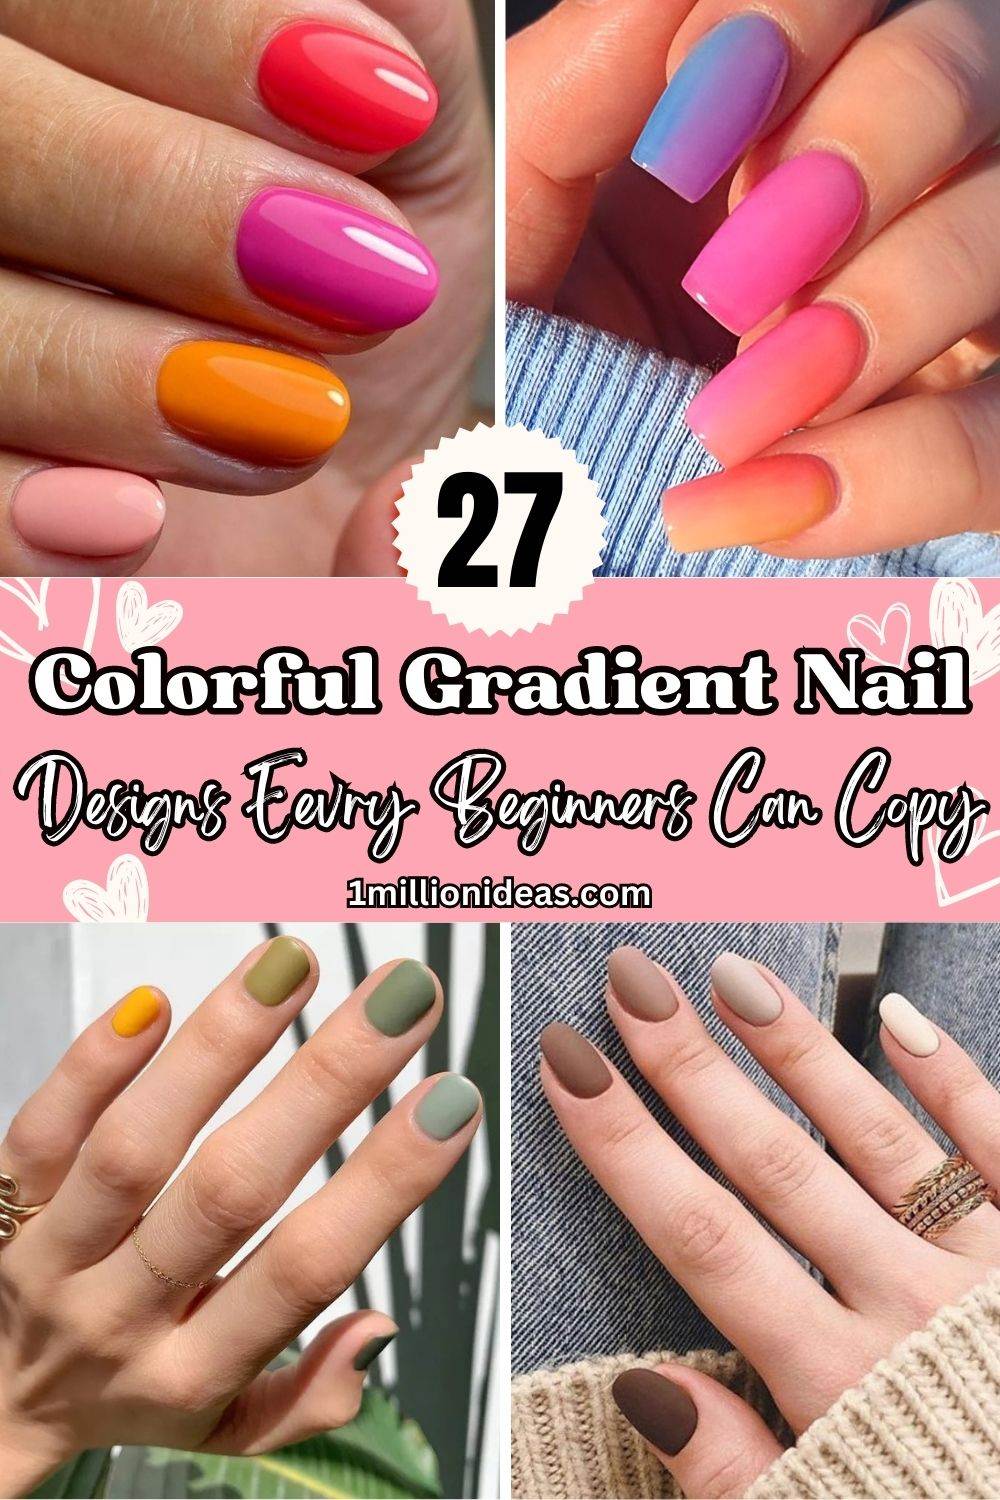 27 Colorful Gradient Nail Designs Every Beginners Can Copy